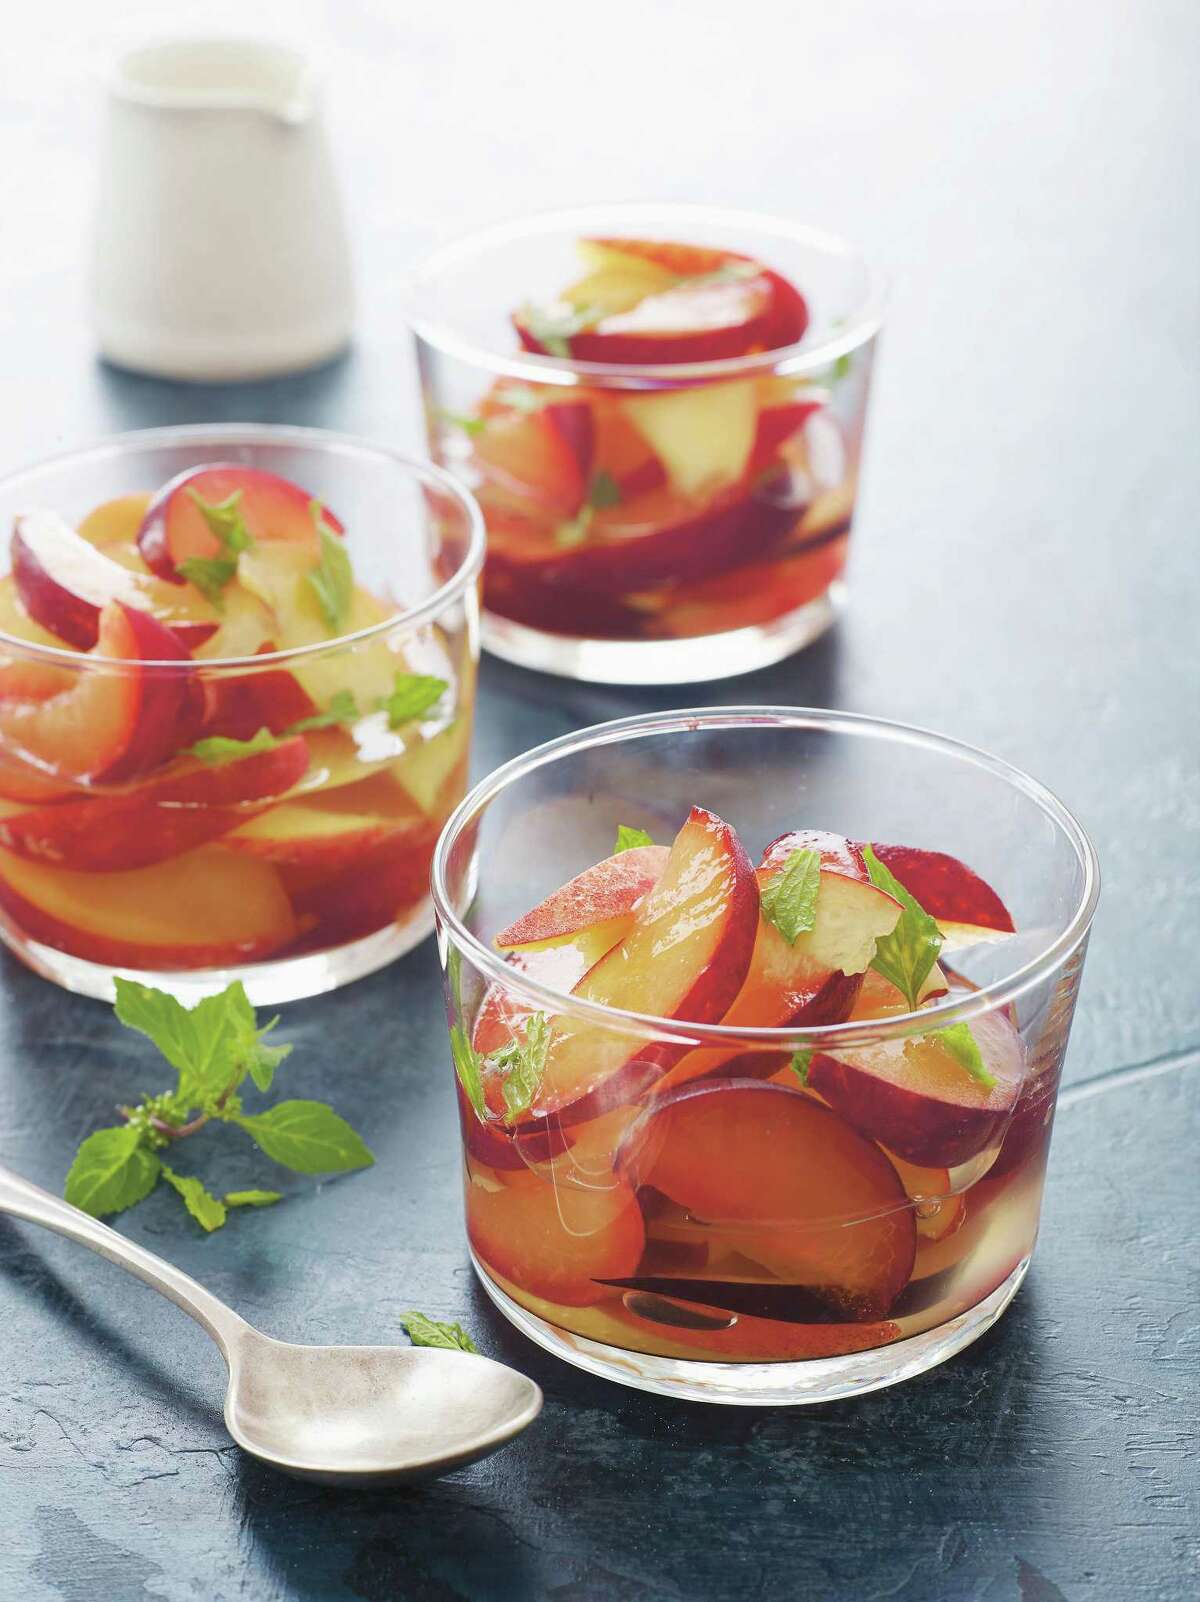 Stone Fruit with Ginger-Lime Syrup & Fresh Mint from “Once Upon a Chef” by Jennifer Segal.